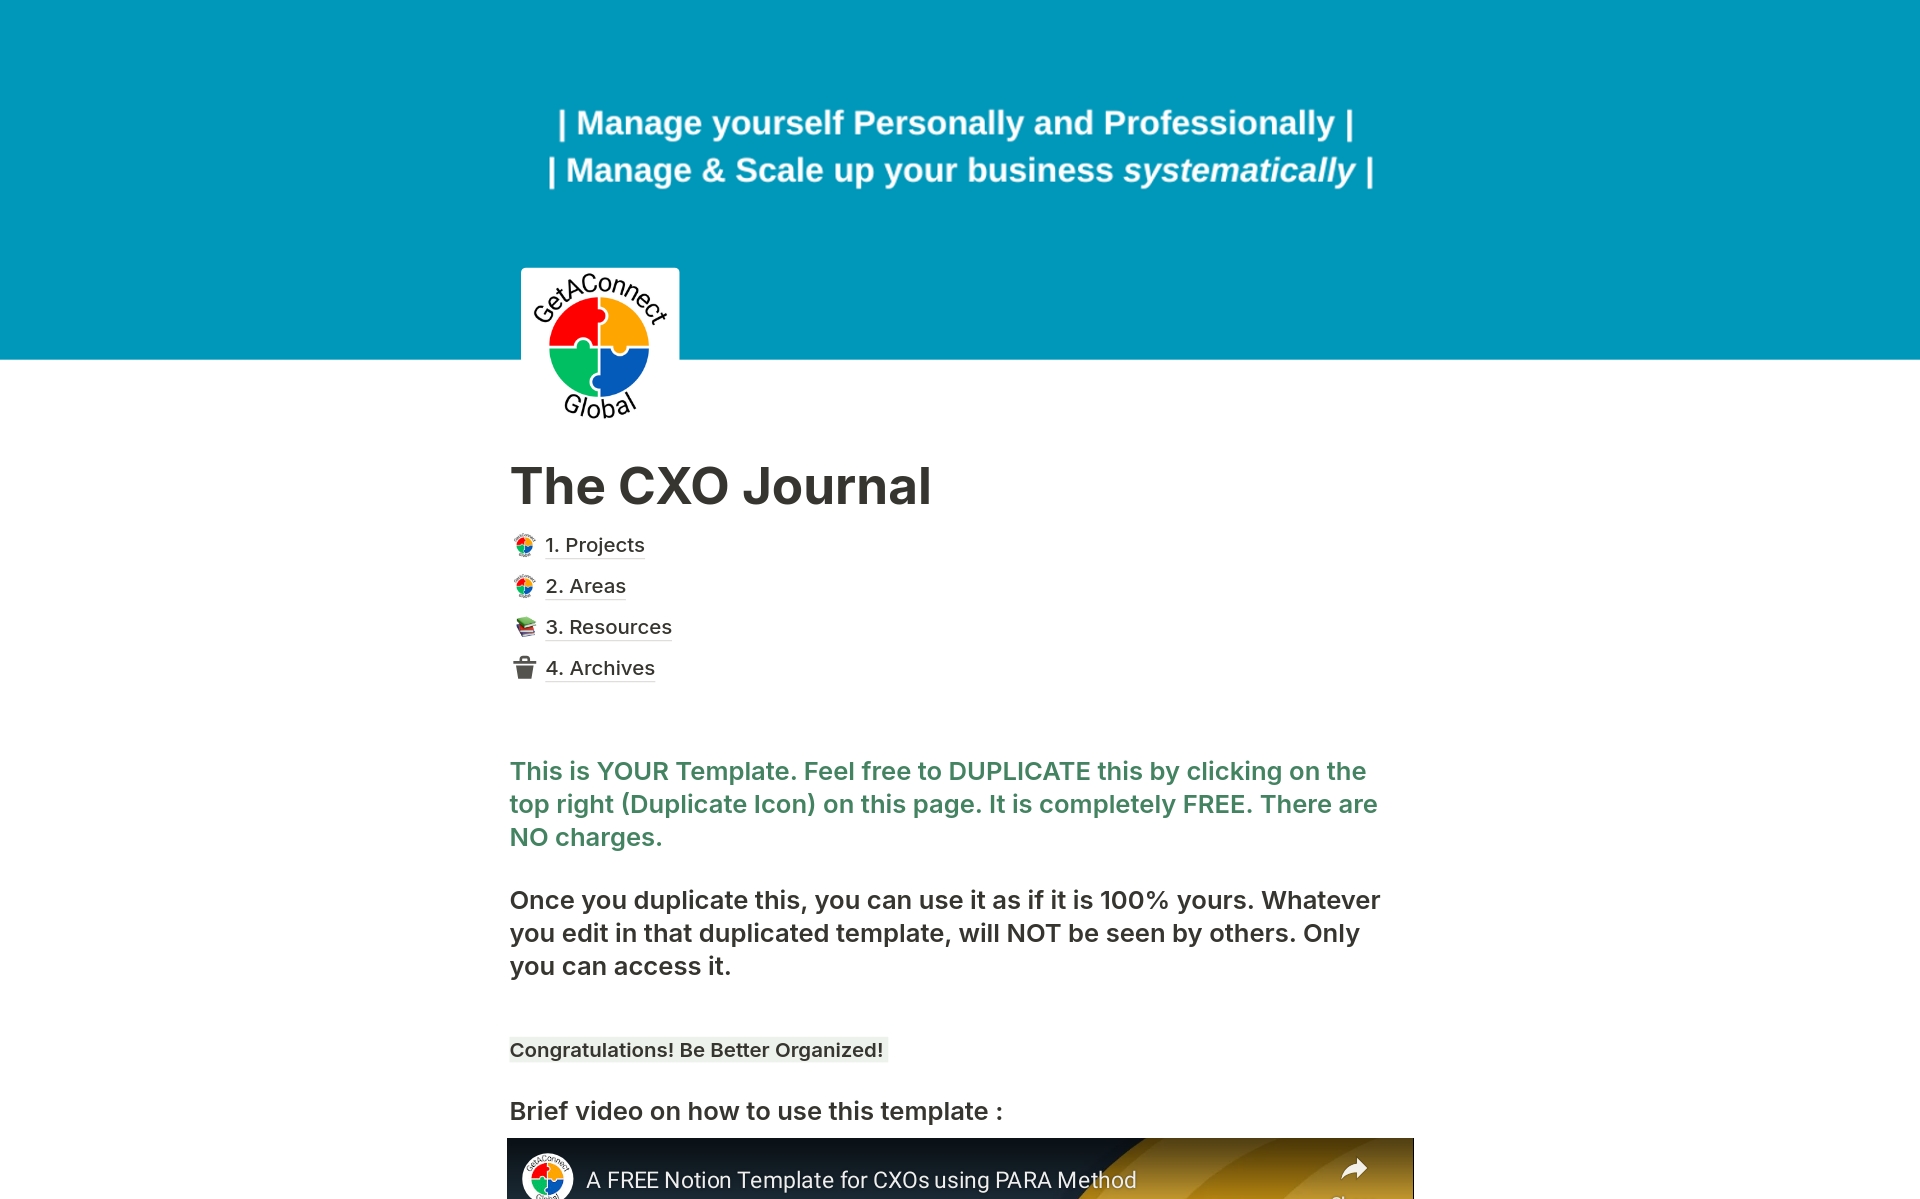 A FREE Template for CXOs/To Be CXOs/Entrepreneurs using popular PARA Method | Implement PARA Method in real life using Technology | Manage yourself personally as well as professionally | Manage & Scale up your business systematically | Be Better Organized | 